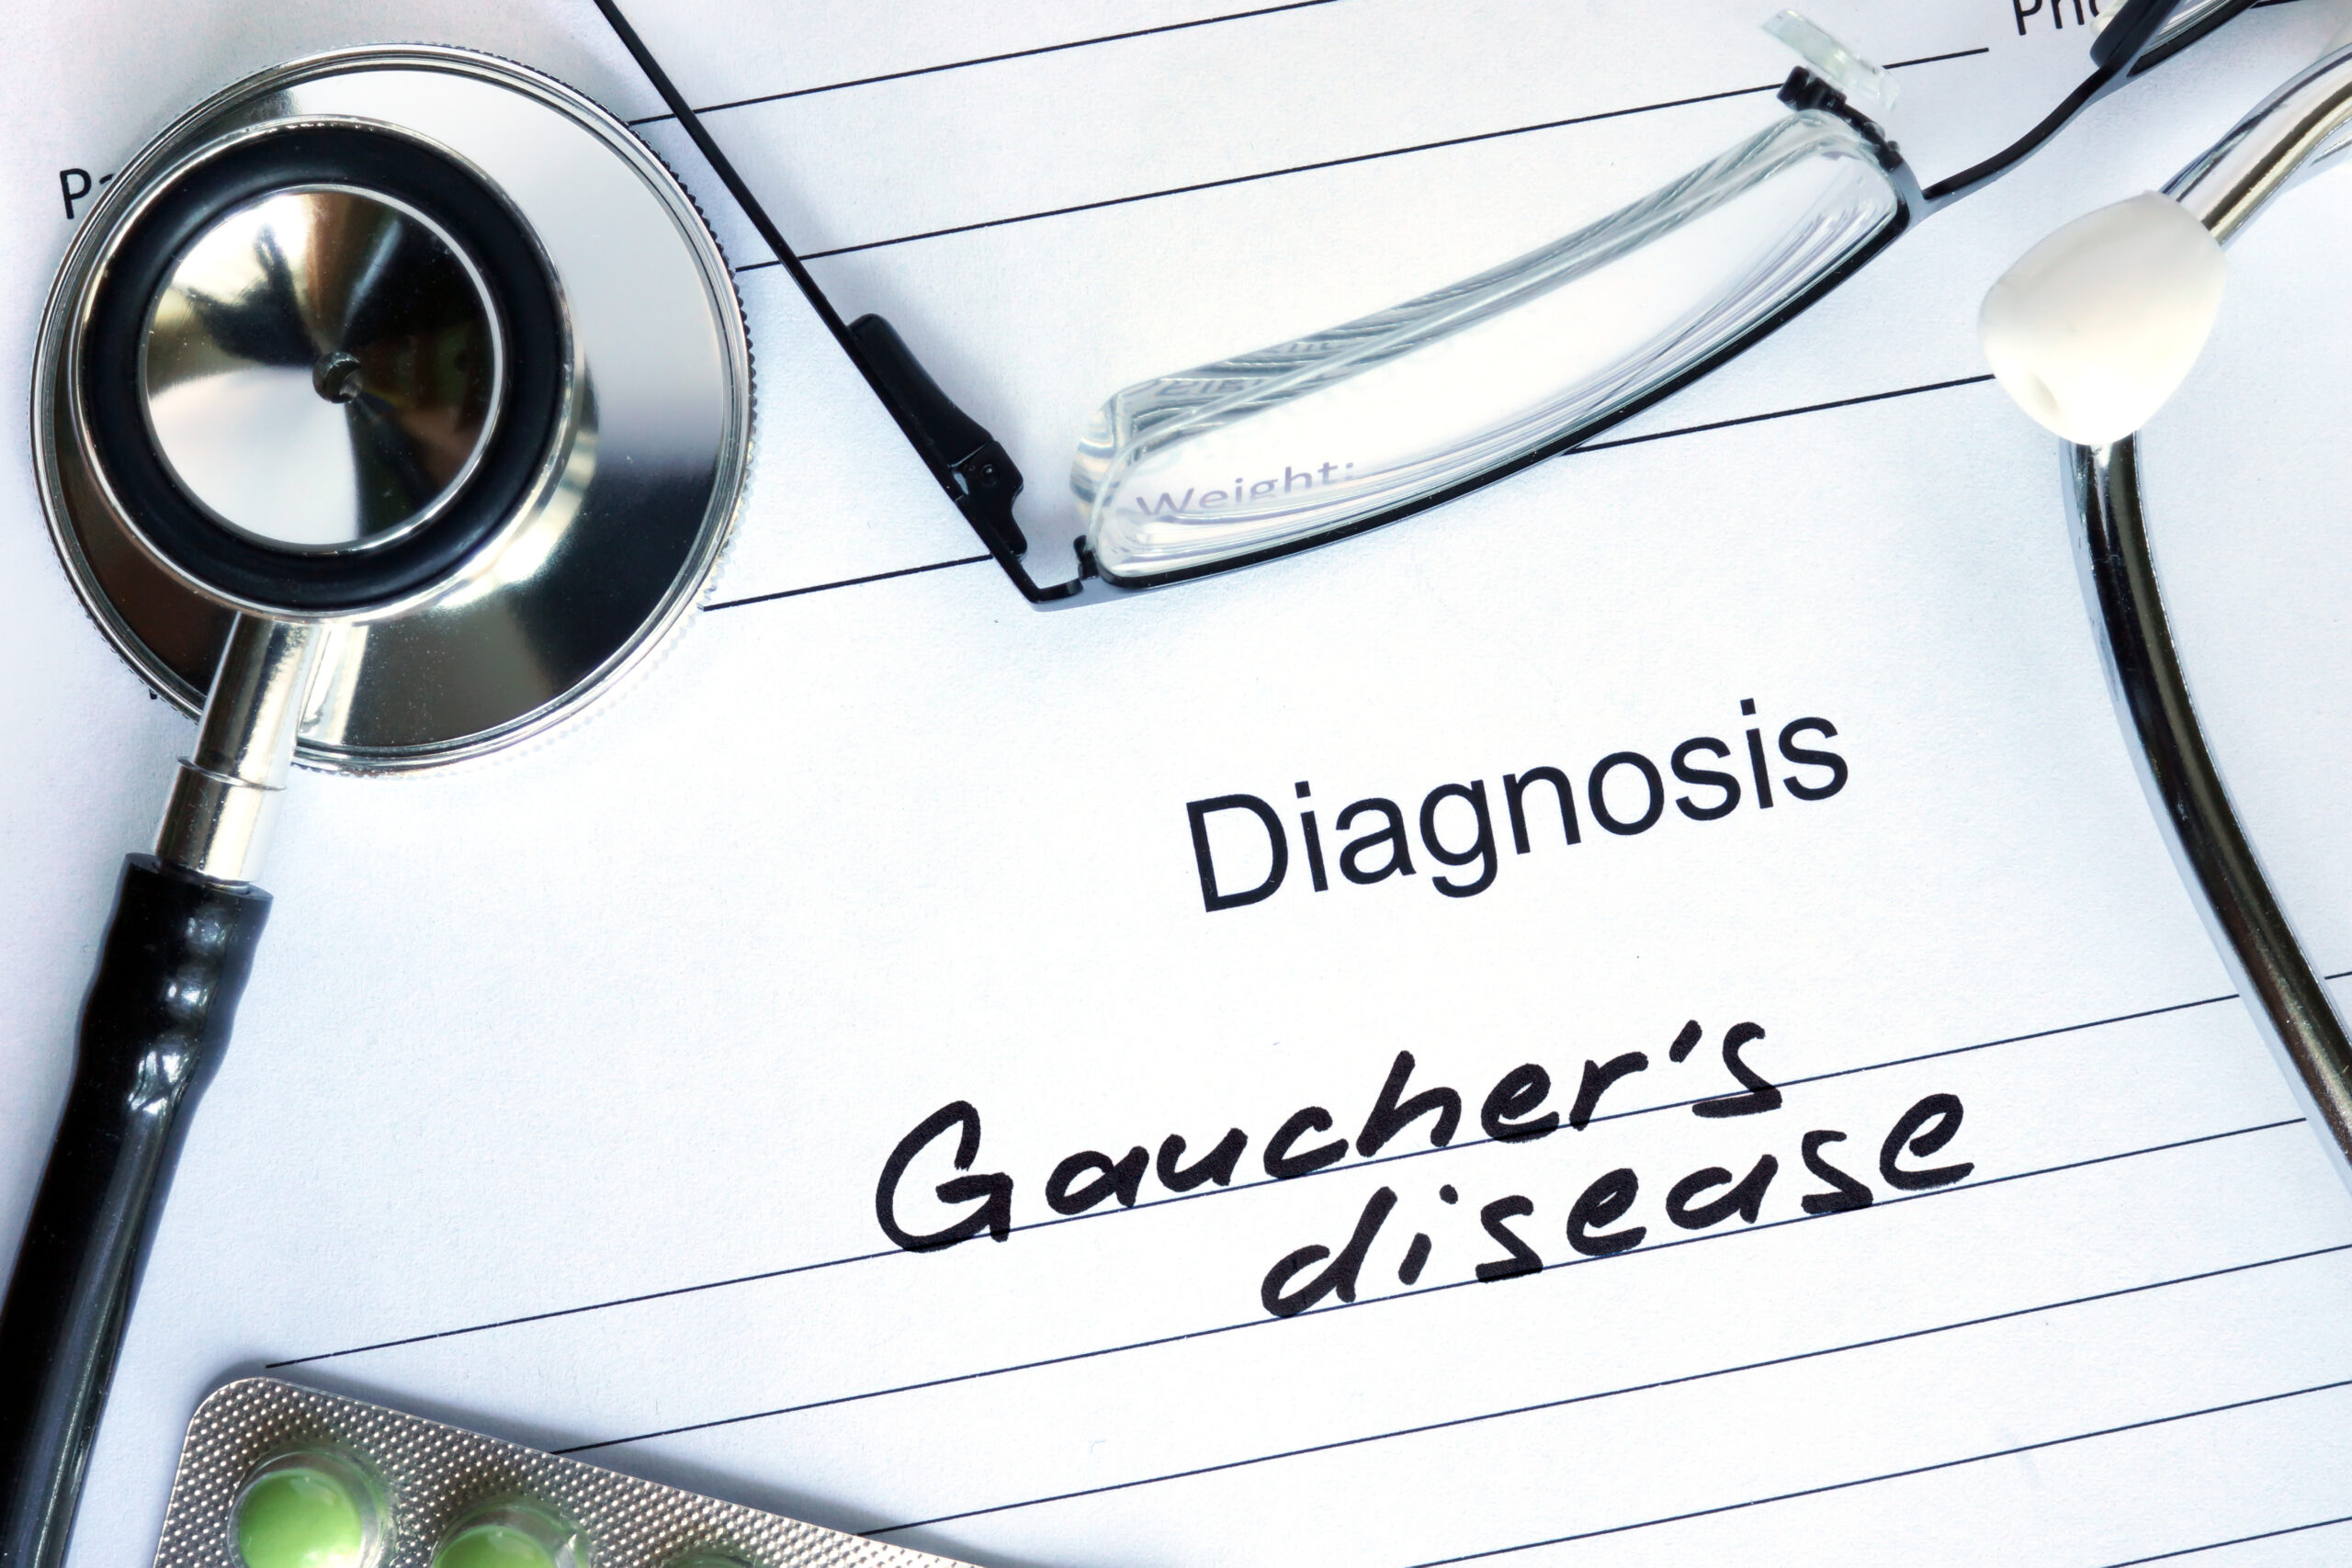 Diagnosis Gauchers disease and tablets on a wooden table.